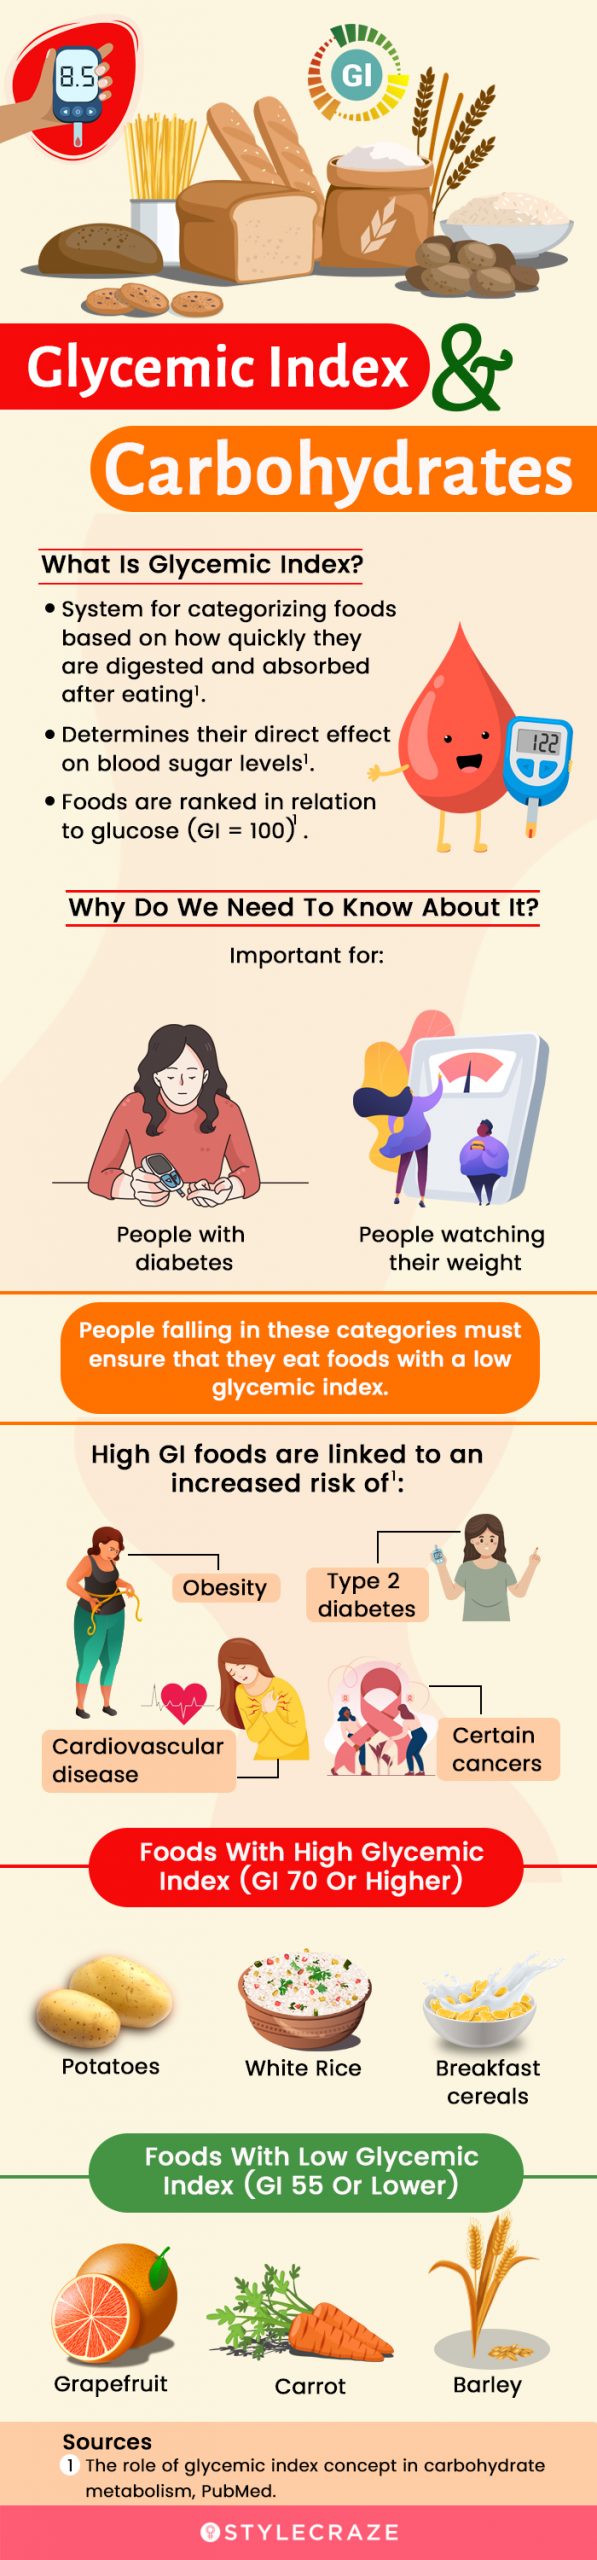 glycemic index and carbohydrates (infographic)